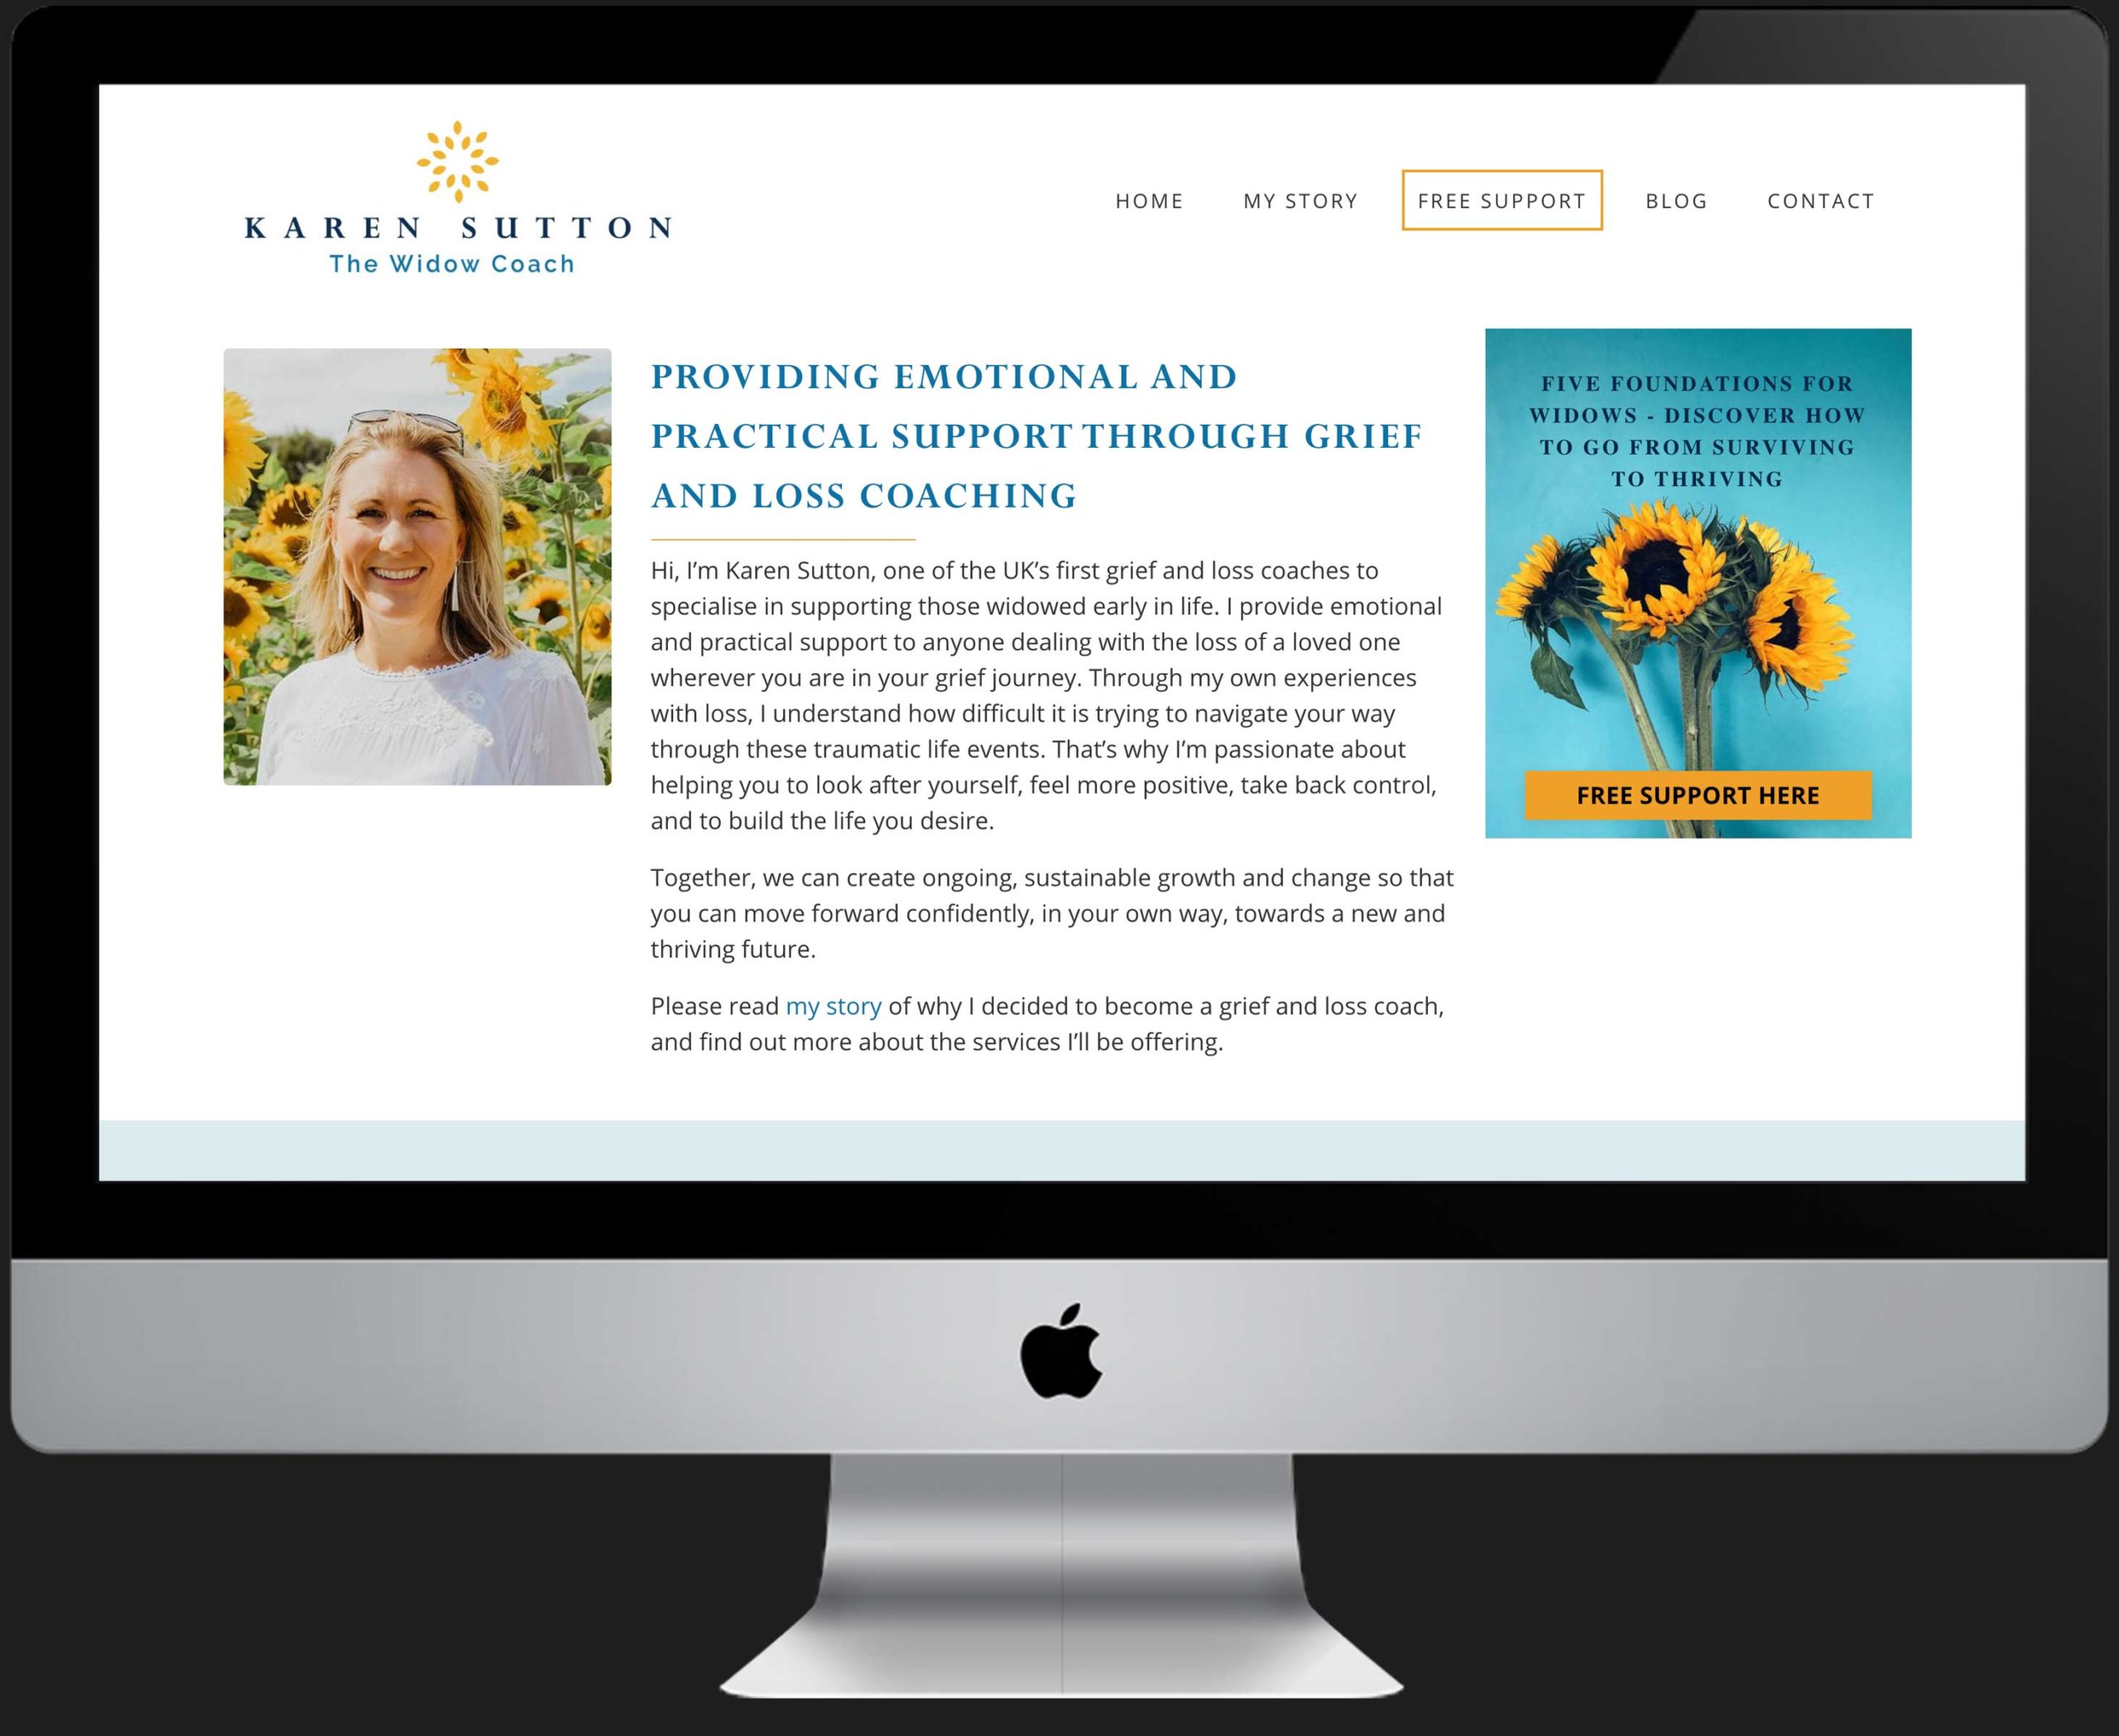 Your Personal Brand Website ready to promote